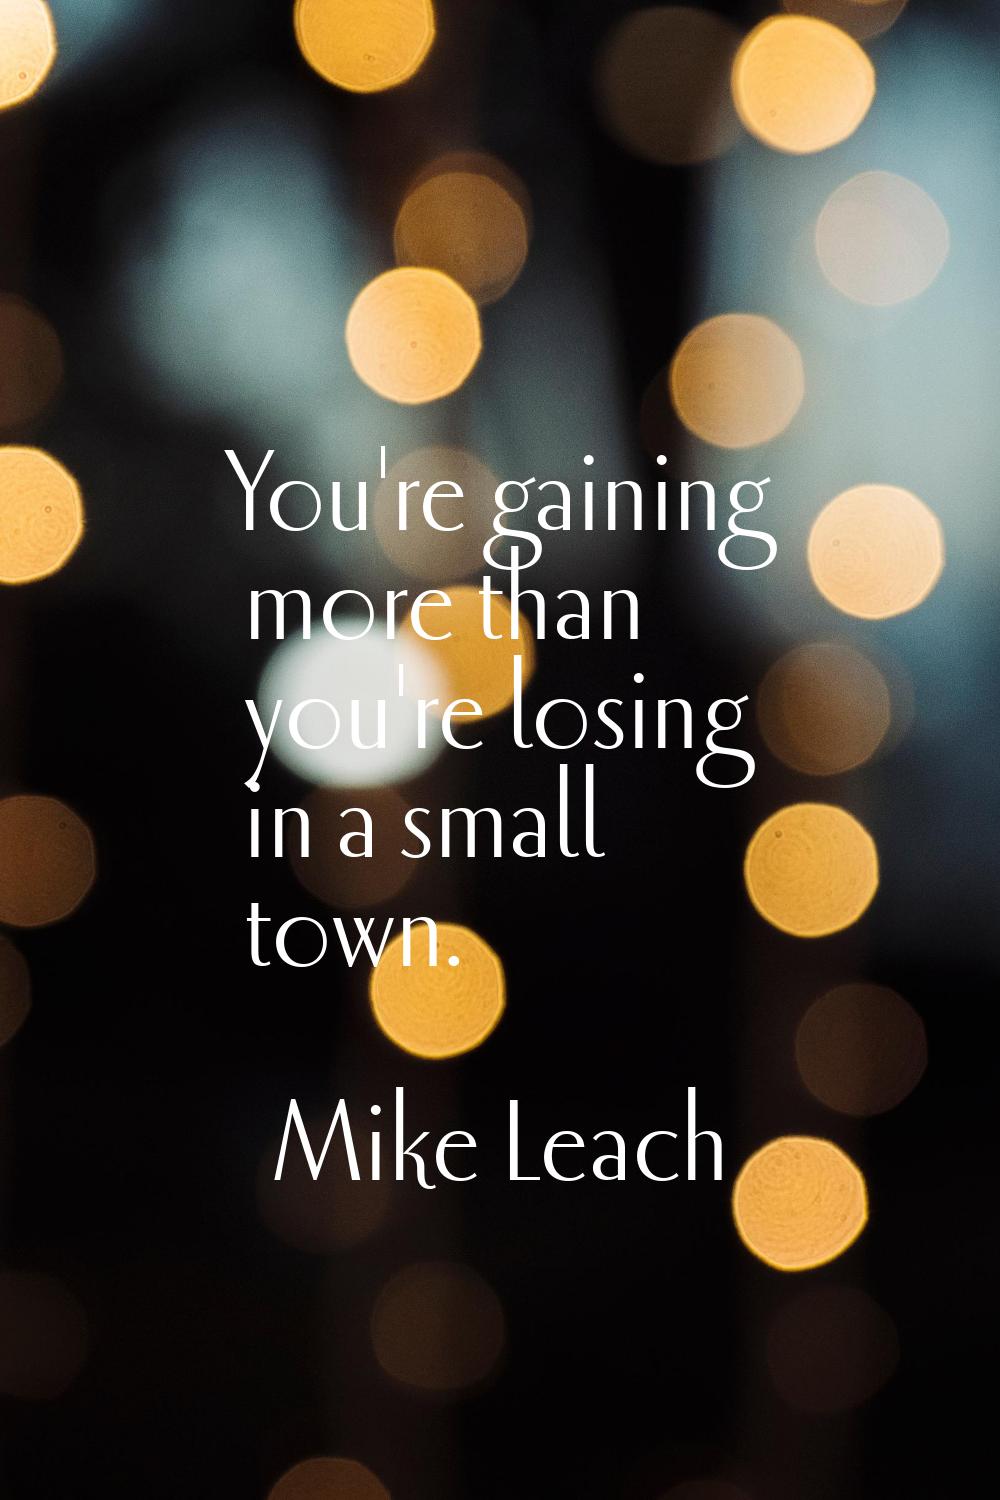 You're gaining more than you're losing in a small town.